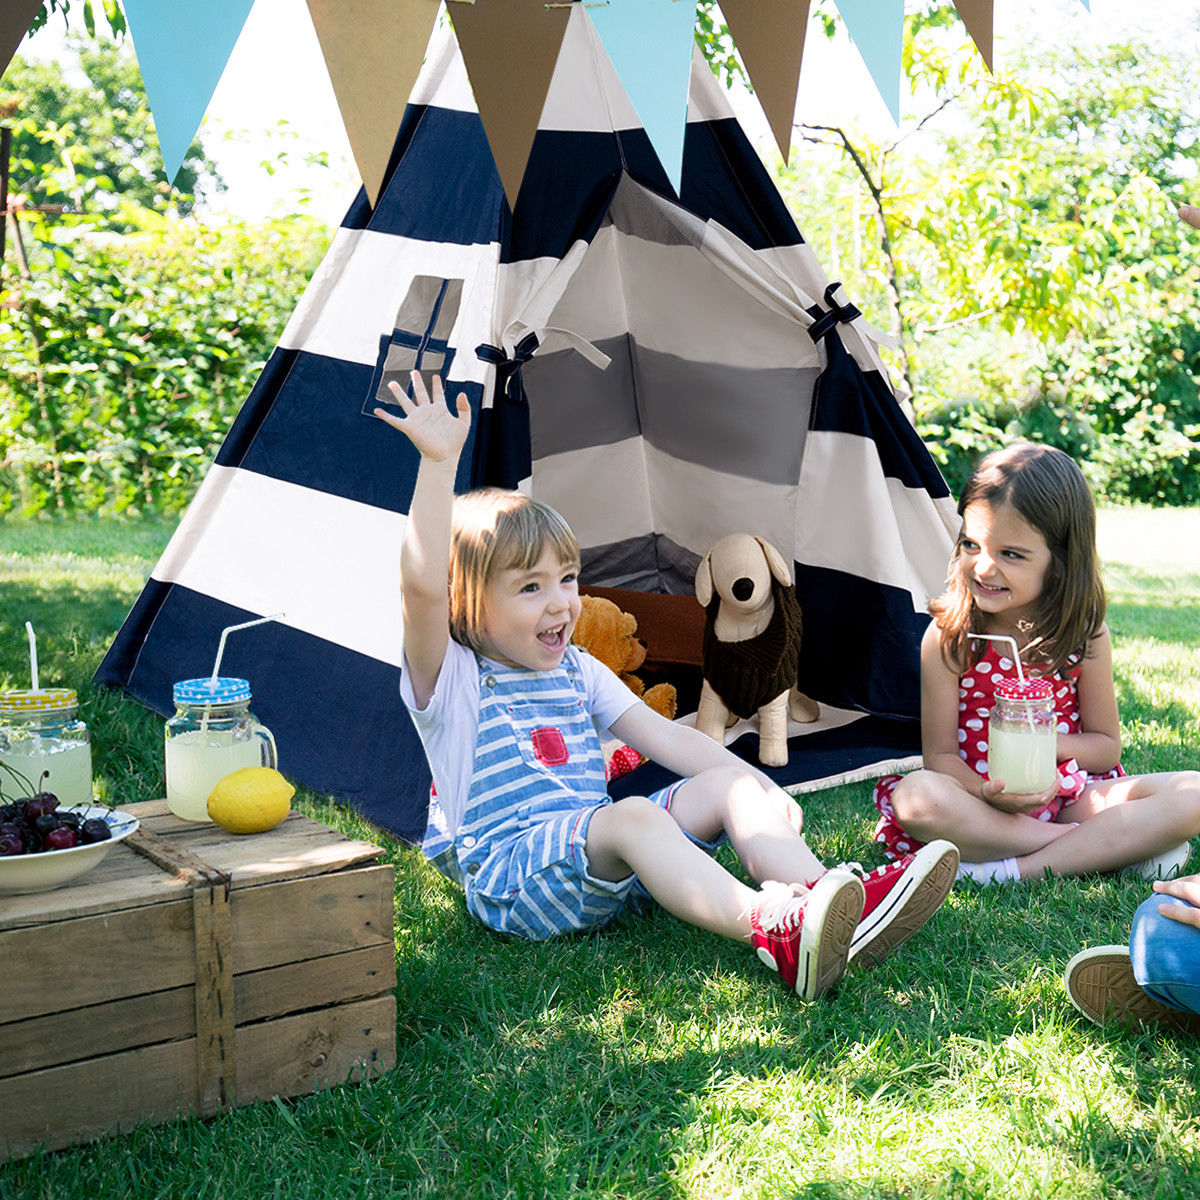 Portable Play Tent Teepee Children Playhouse Sleeping Dome W/Carry Bag - White + Blue